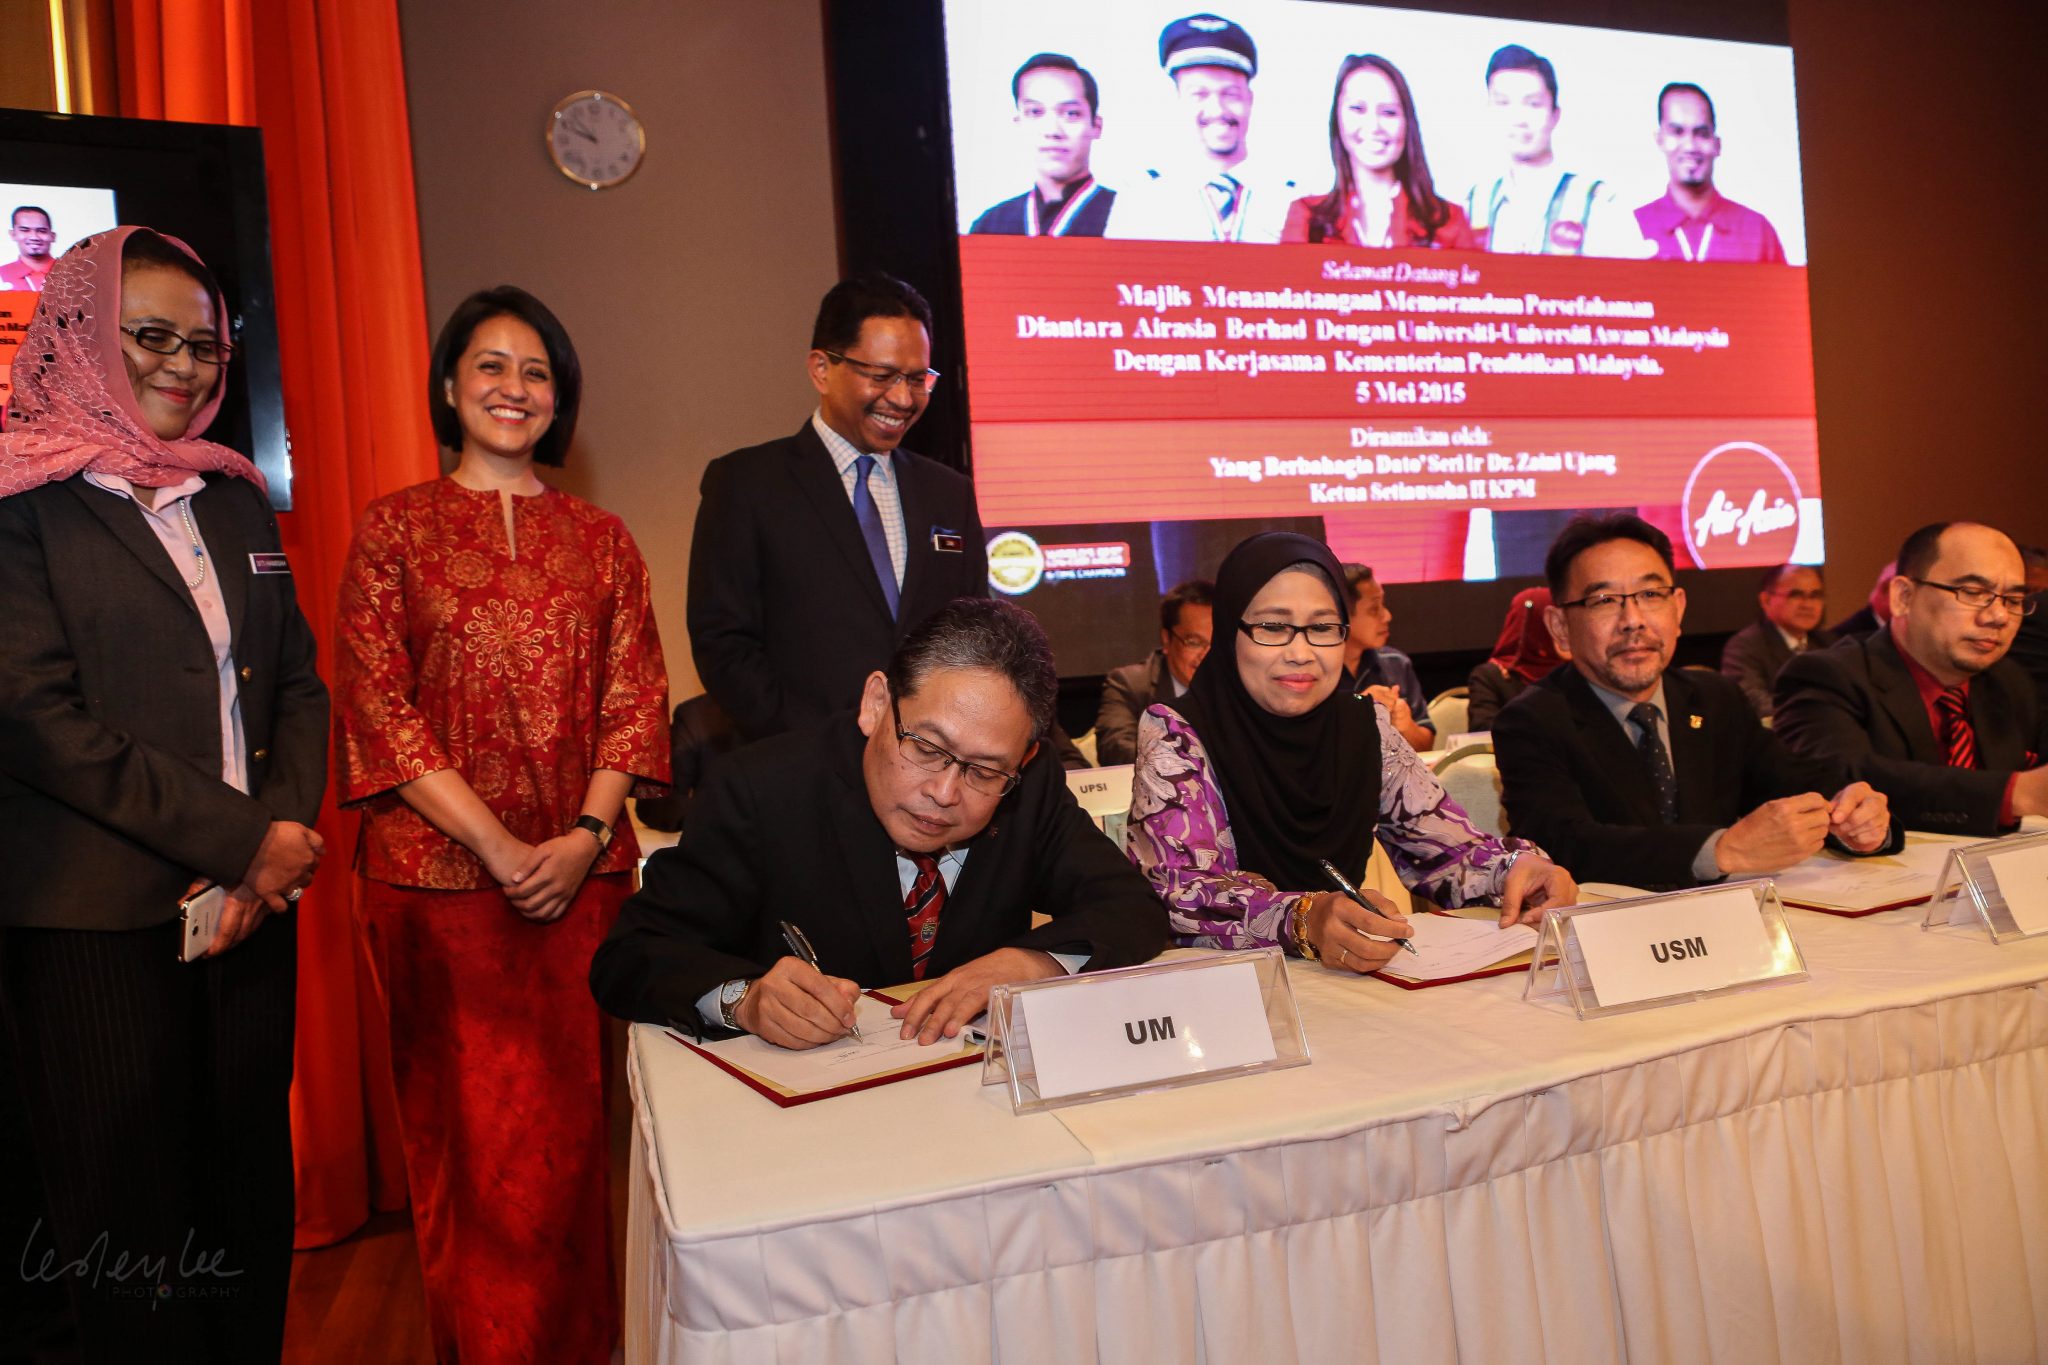 AirAsia offers more affordable fares to Malaysian Universities